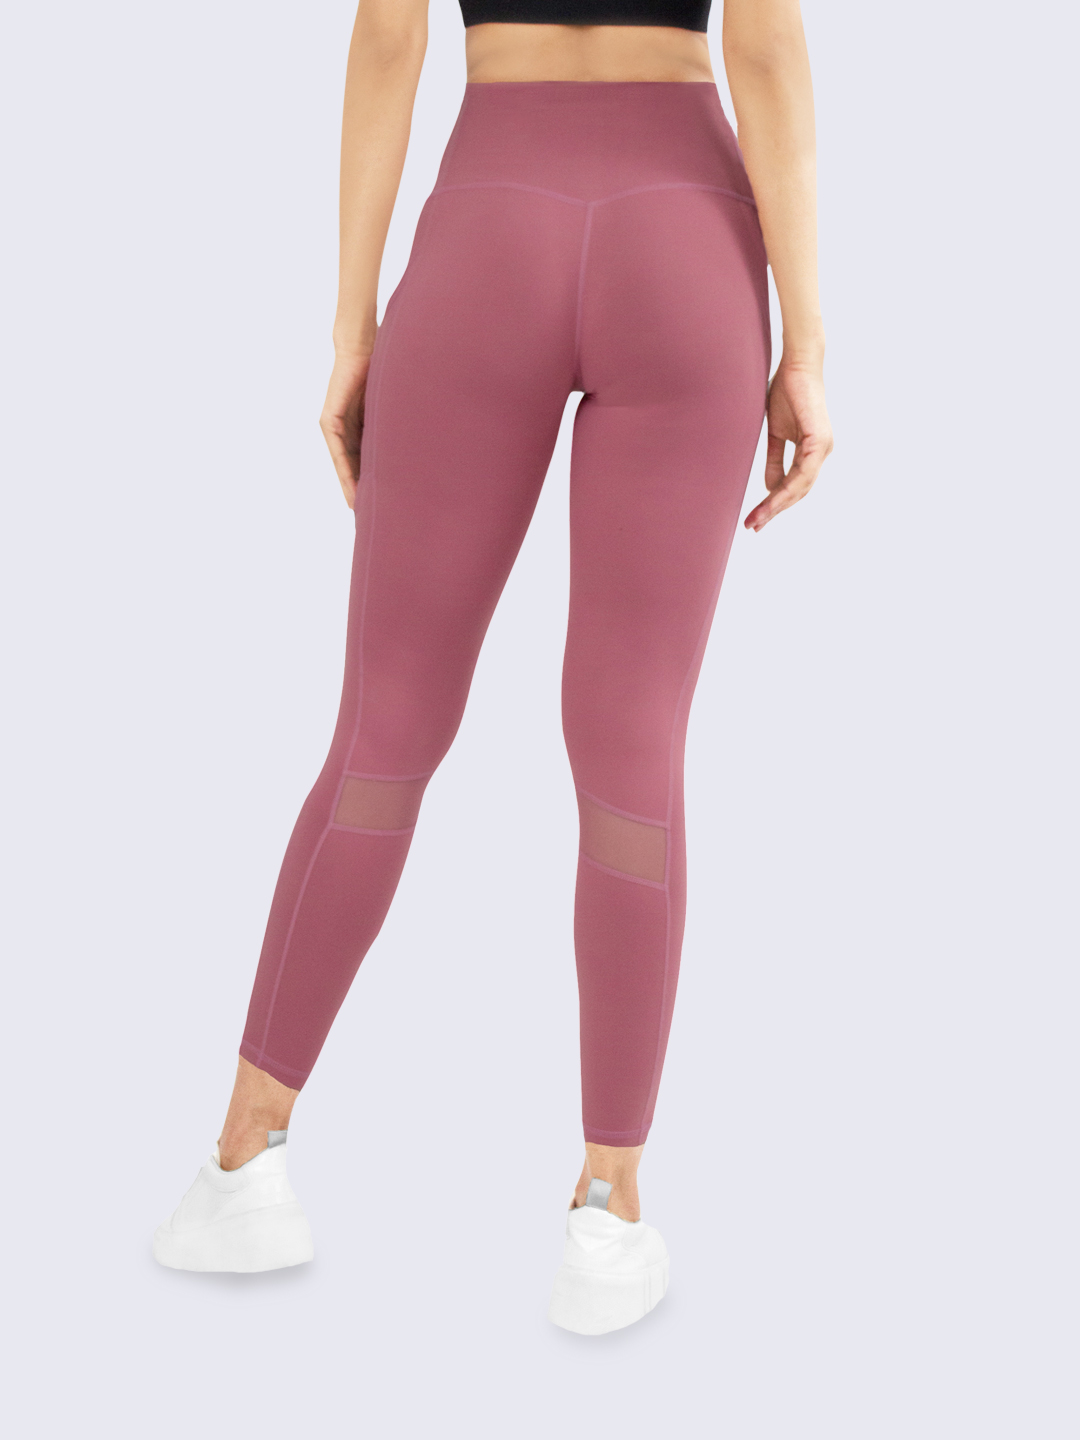 Full Length Leggings with Printed Plums For Women – MICHELLE SALINS